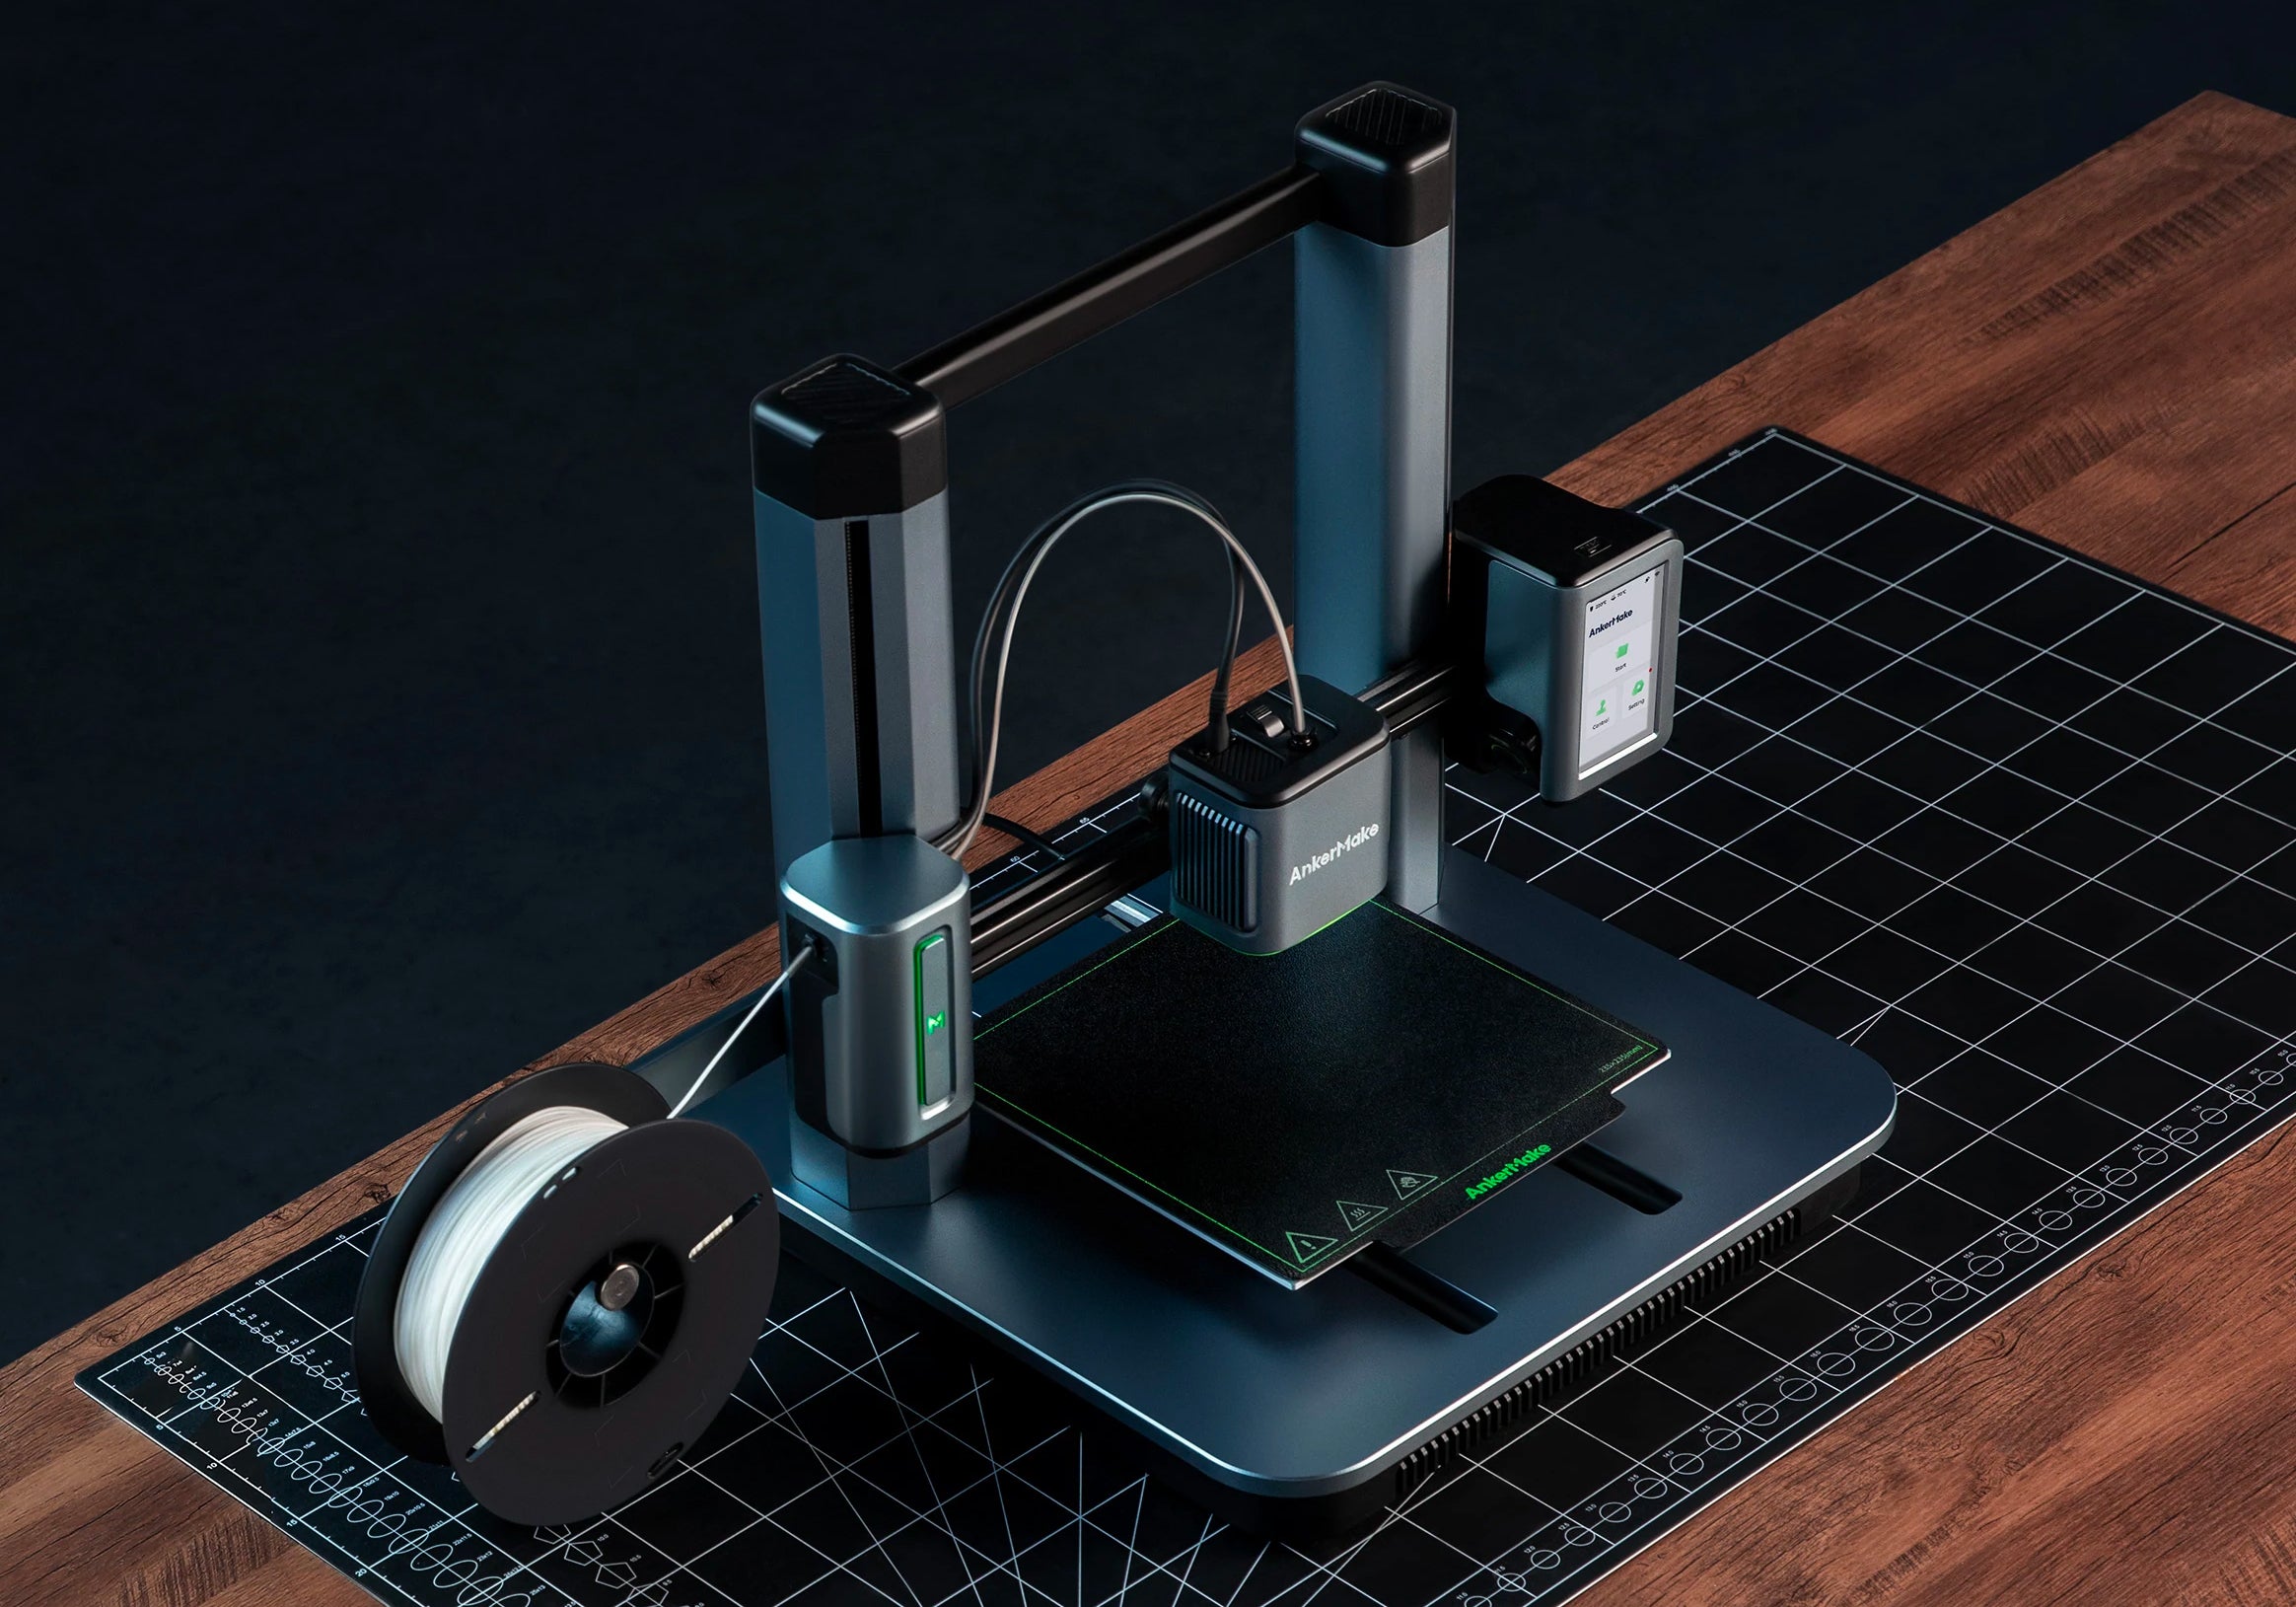 Anker’s First 3D Printer Uses a Smart Camera to Spot Failed Prints